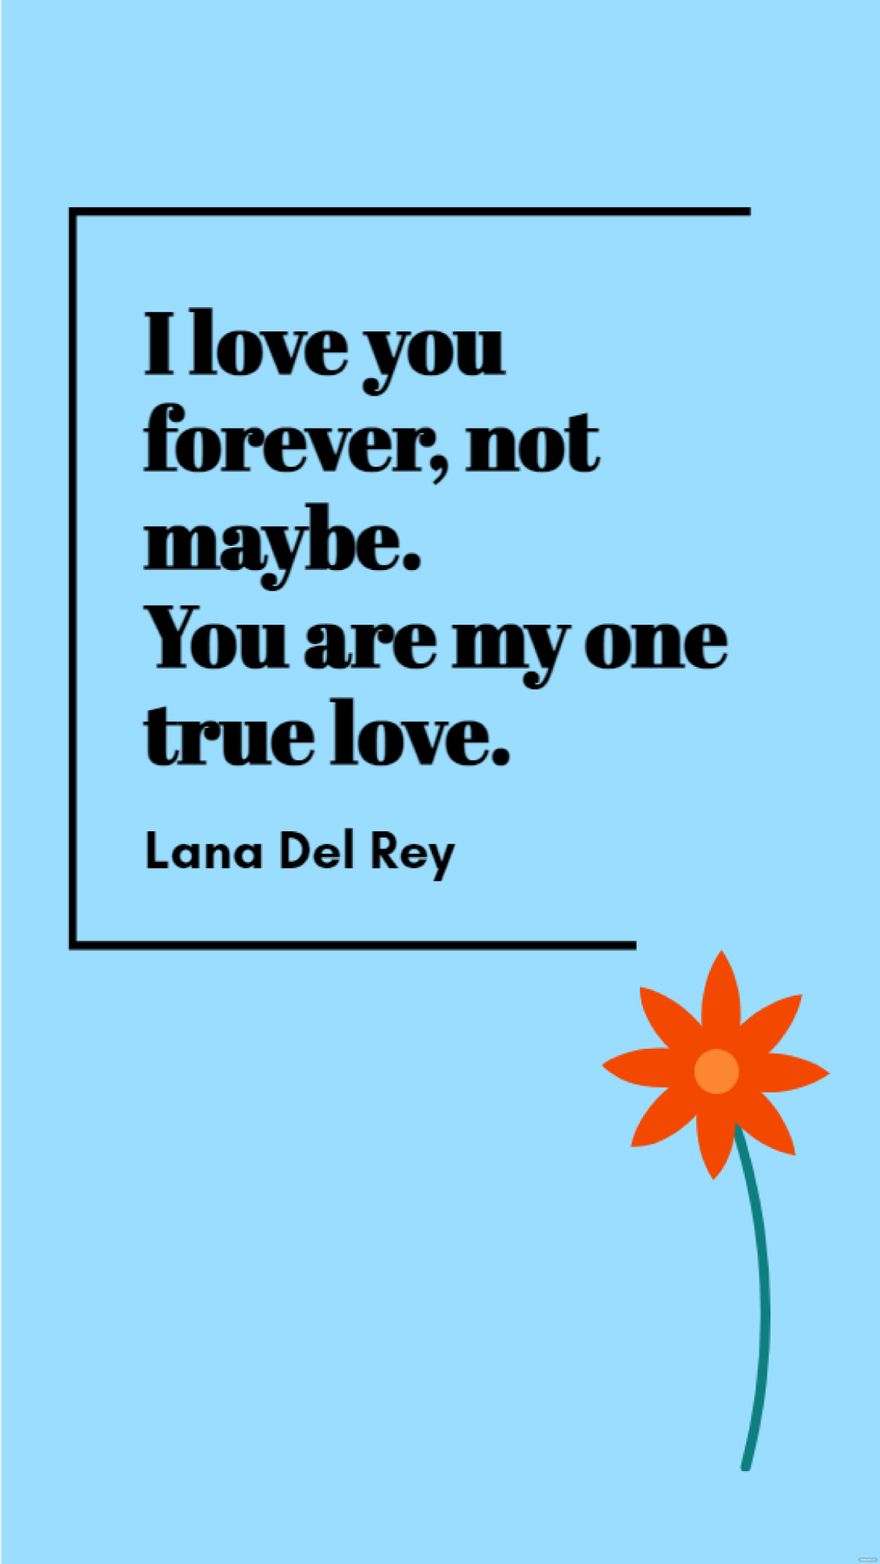 Free Lana Del Rey - I love you forever, not maybe. You are my one true love. in JPG